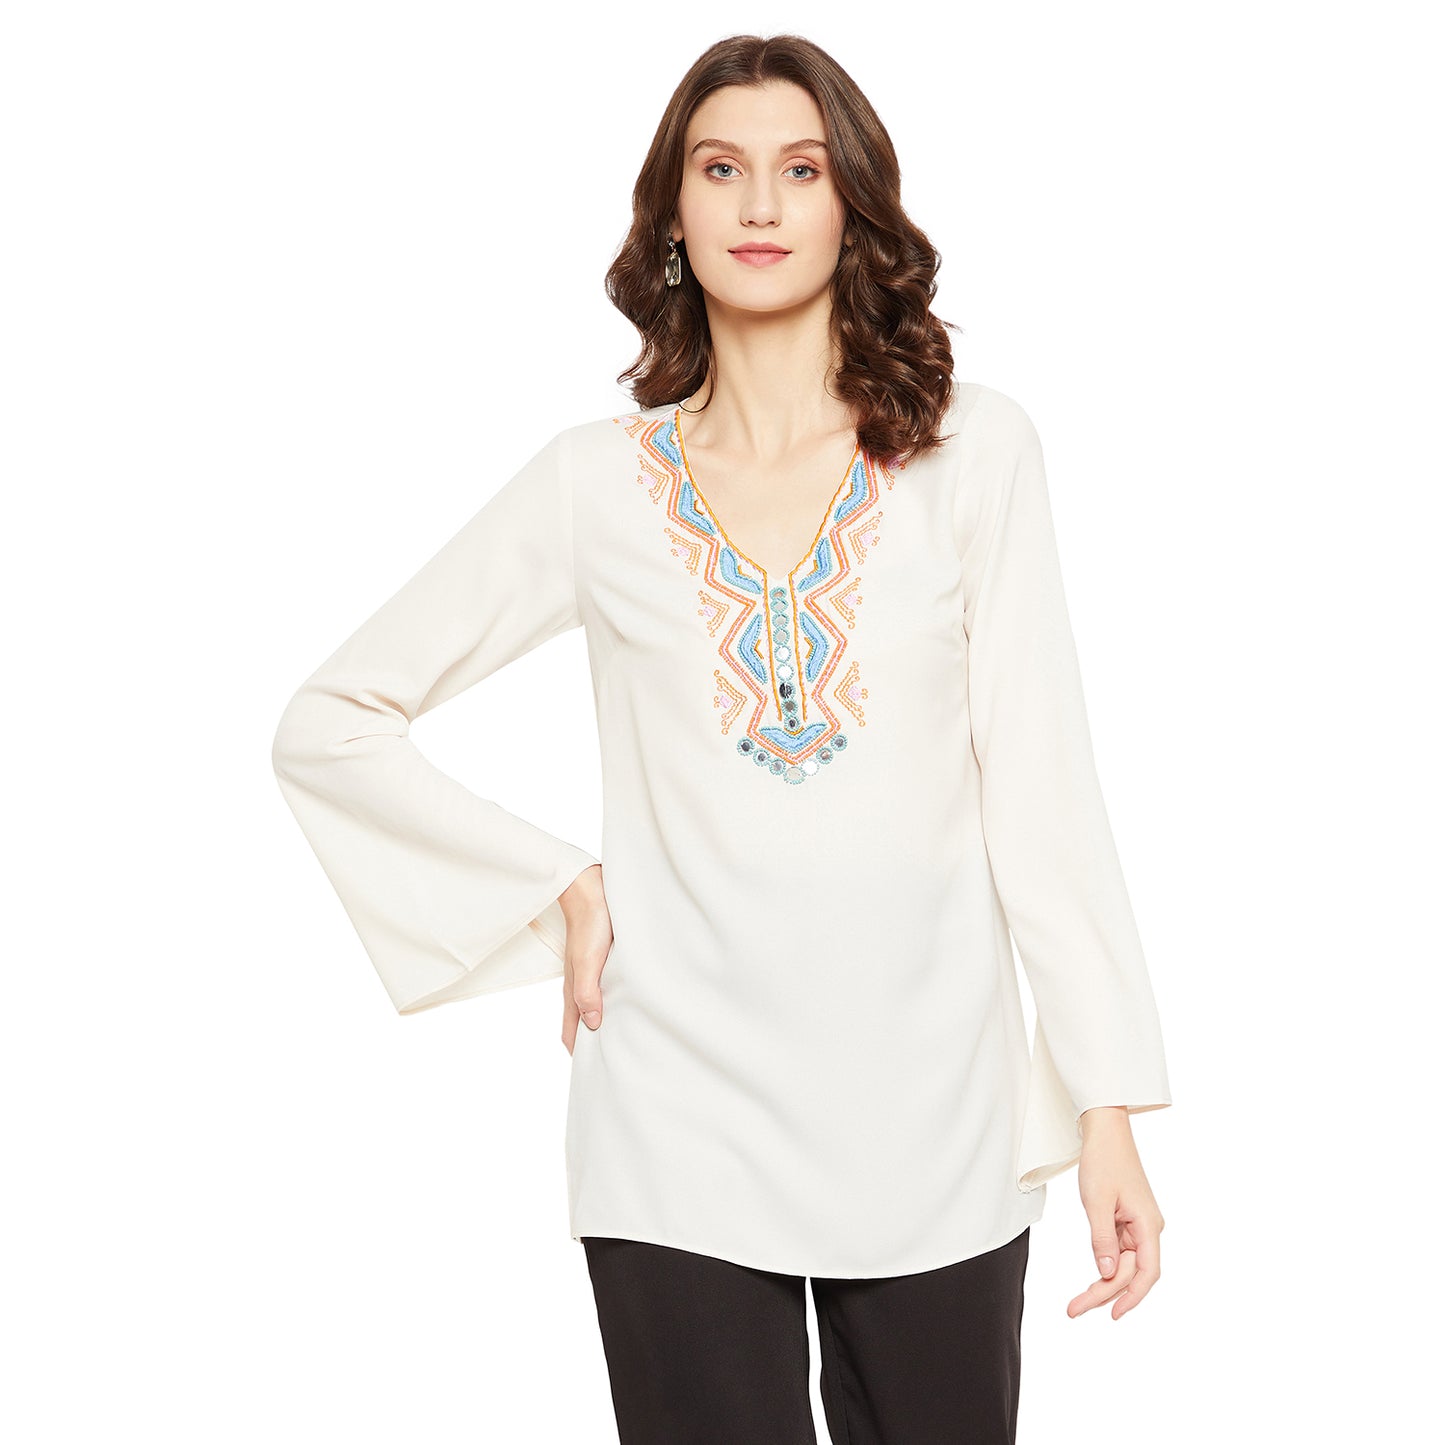 LY2 Elegant cream embellished party wear top.